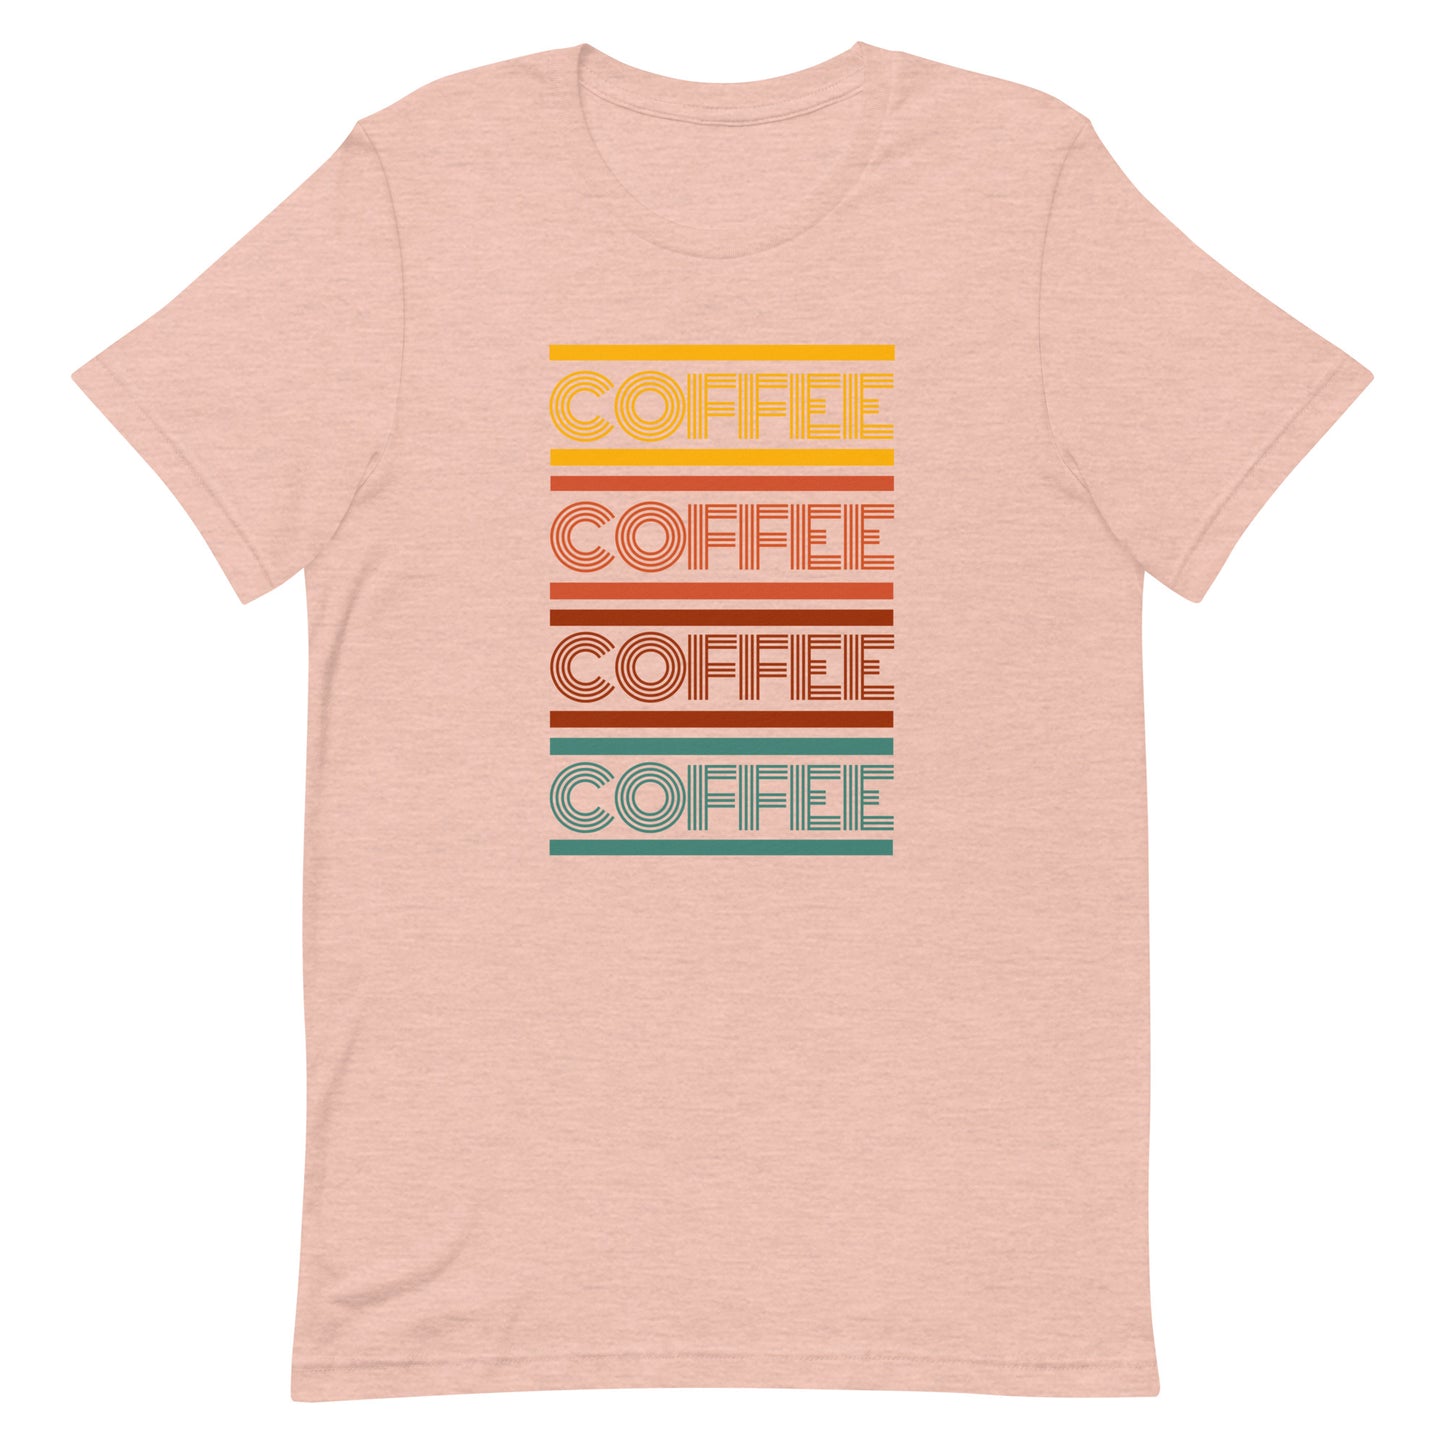 A heather prism peach coffee t-shirt that has the words coffee repeated in a retro inspired font.